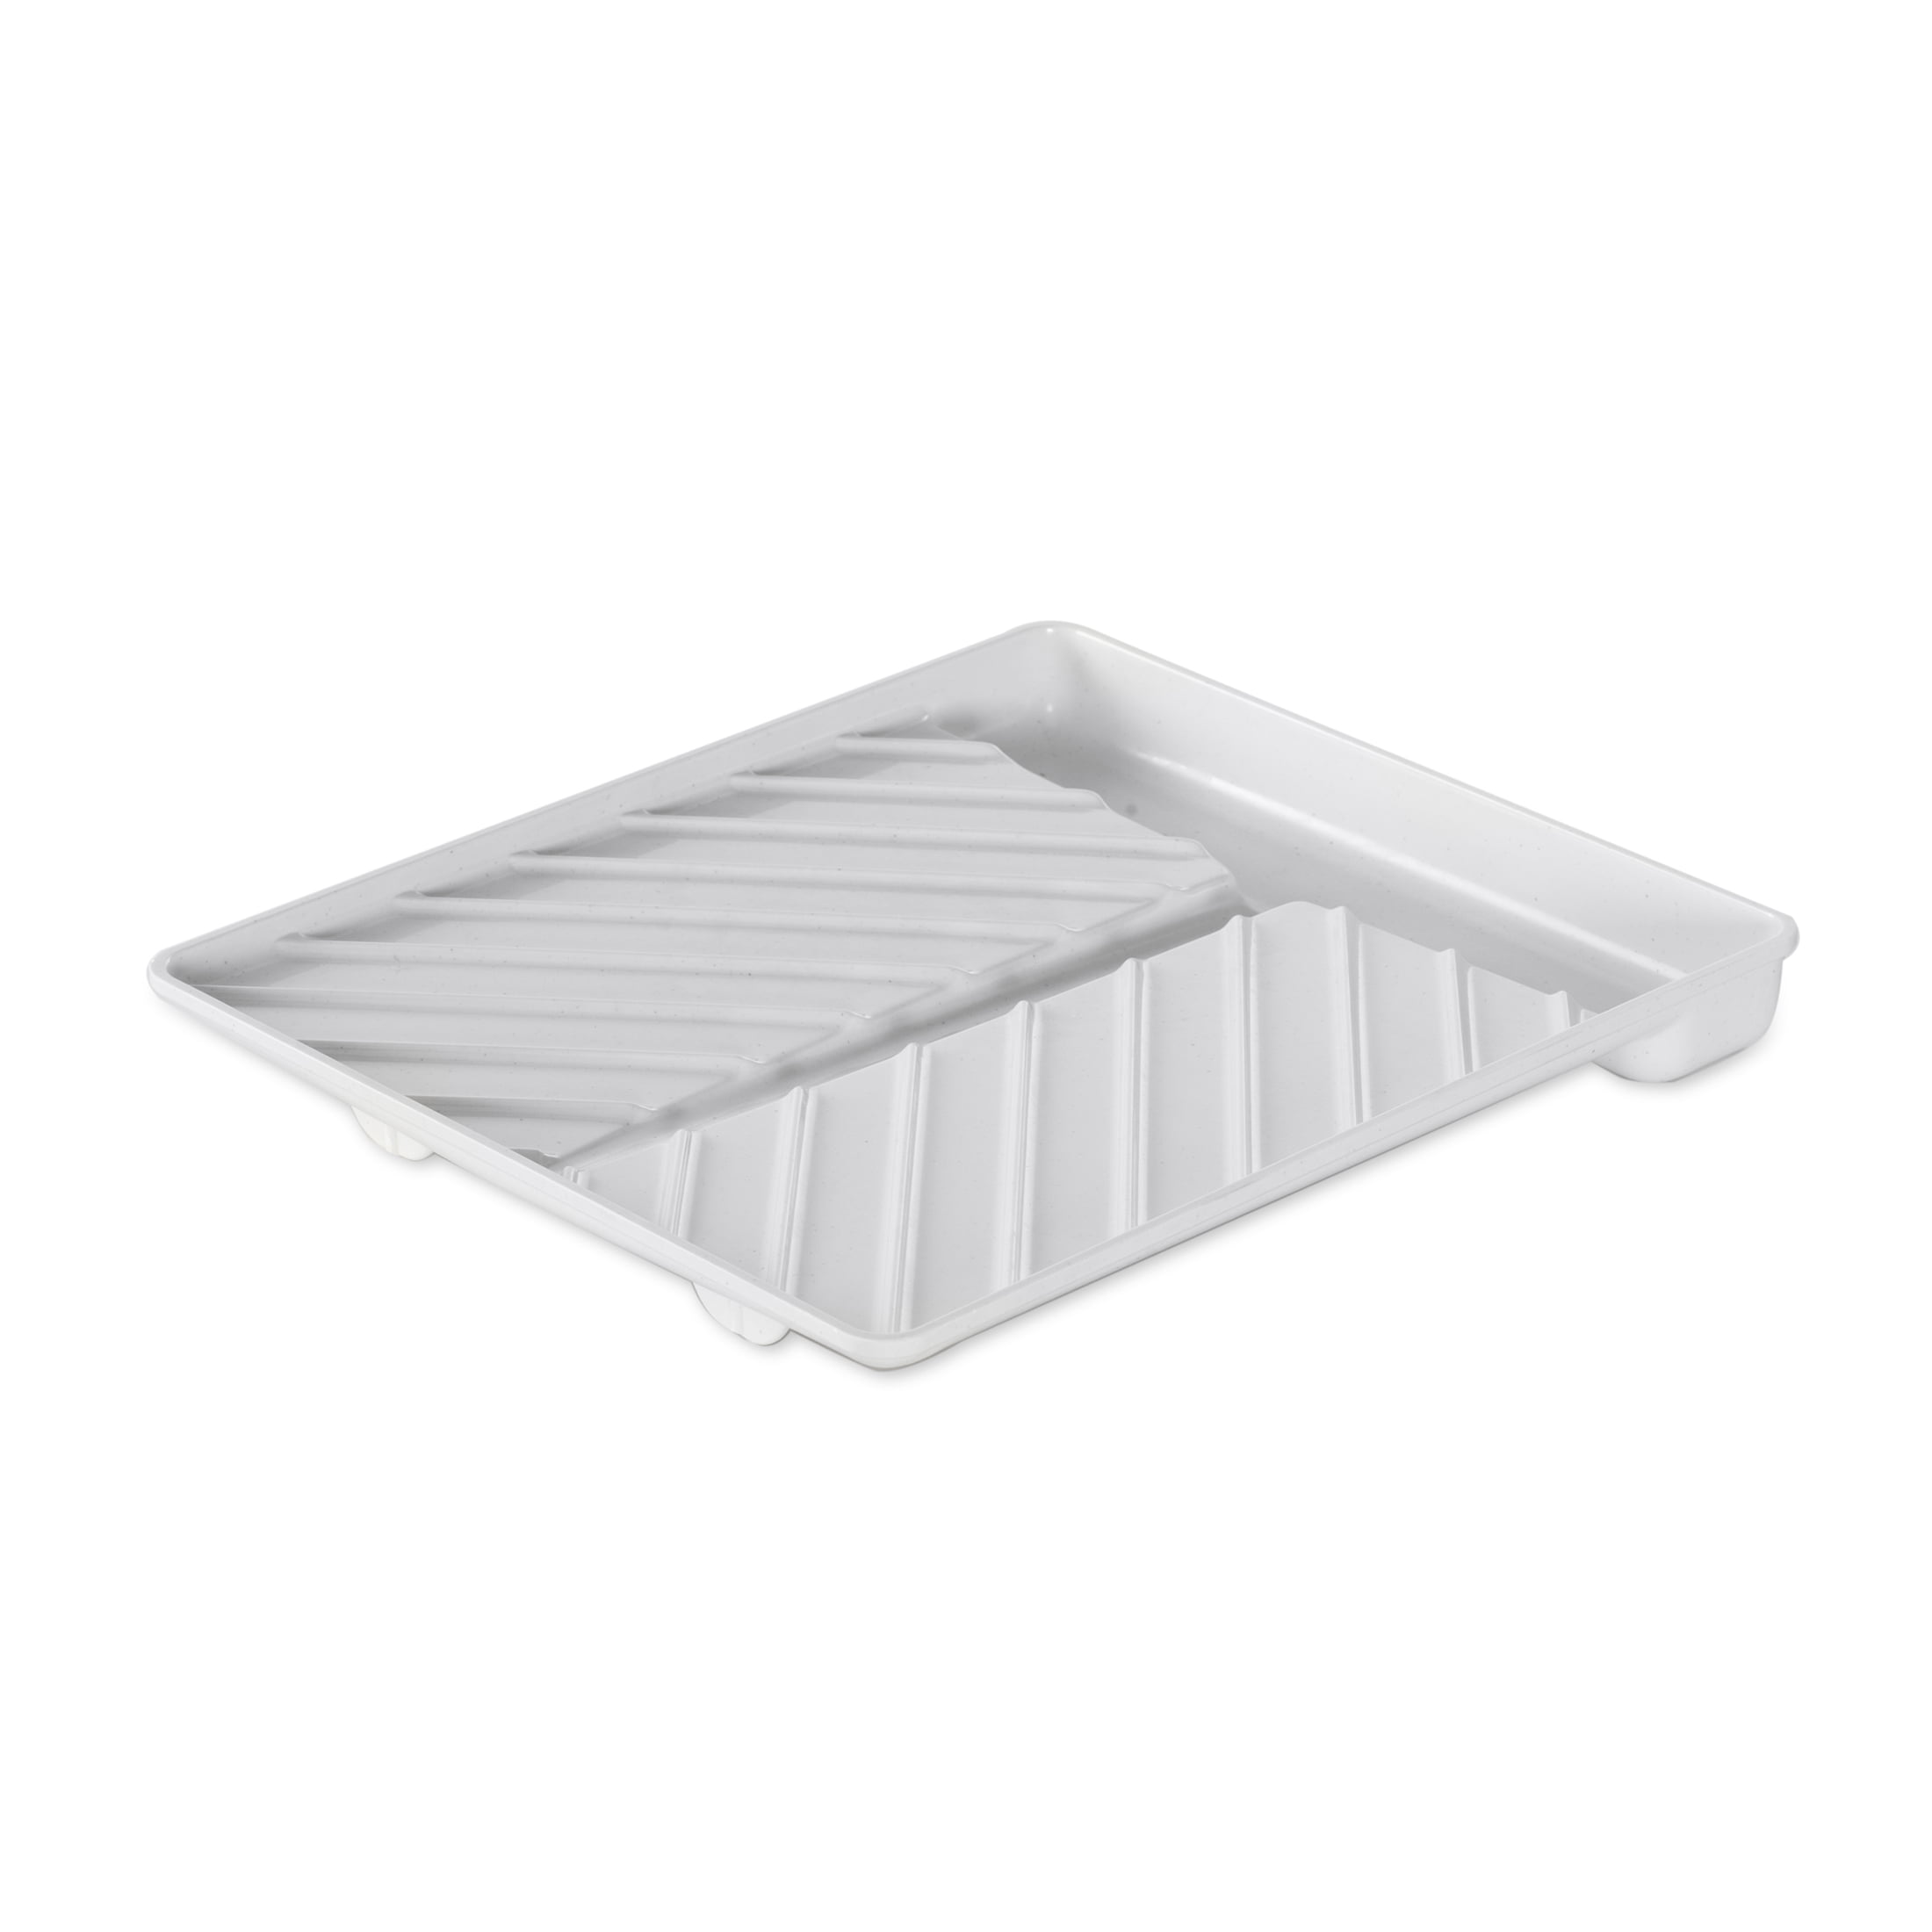 Nordic Ware Microwave-Safe Large Slanted Bacon Tray, White 60151W